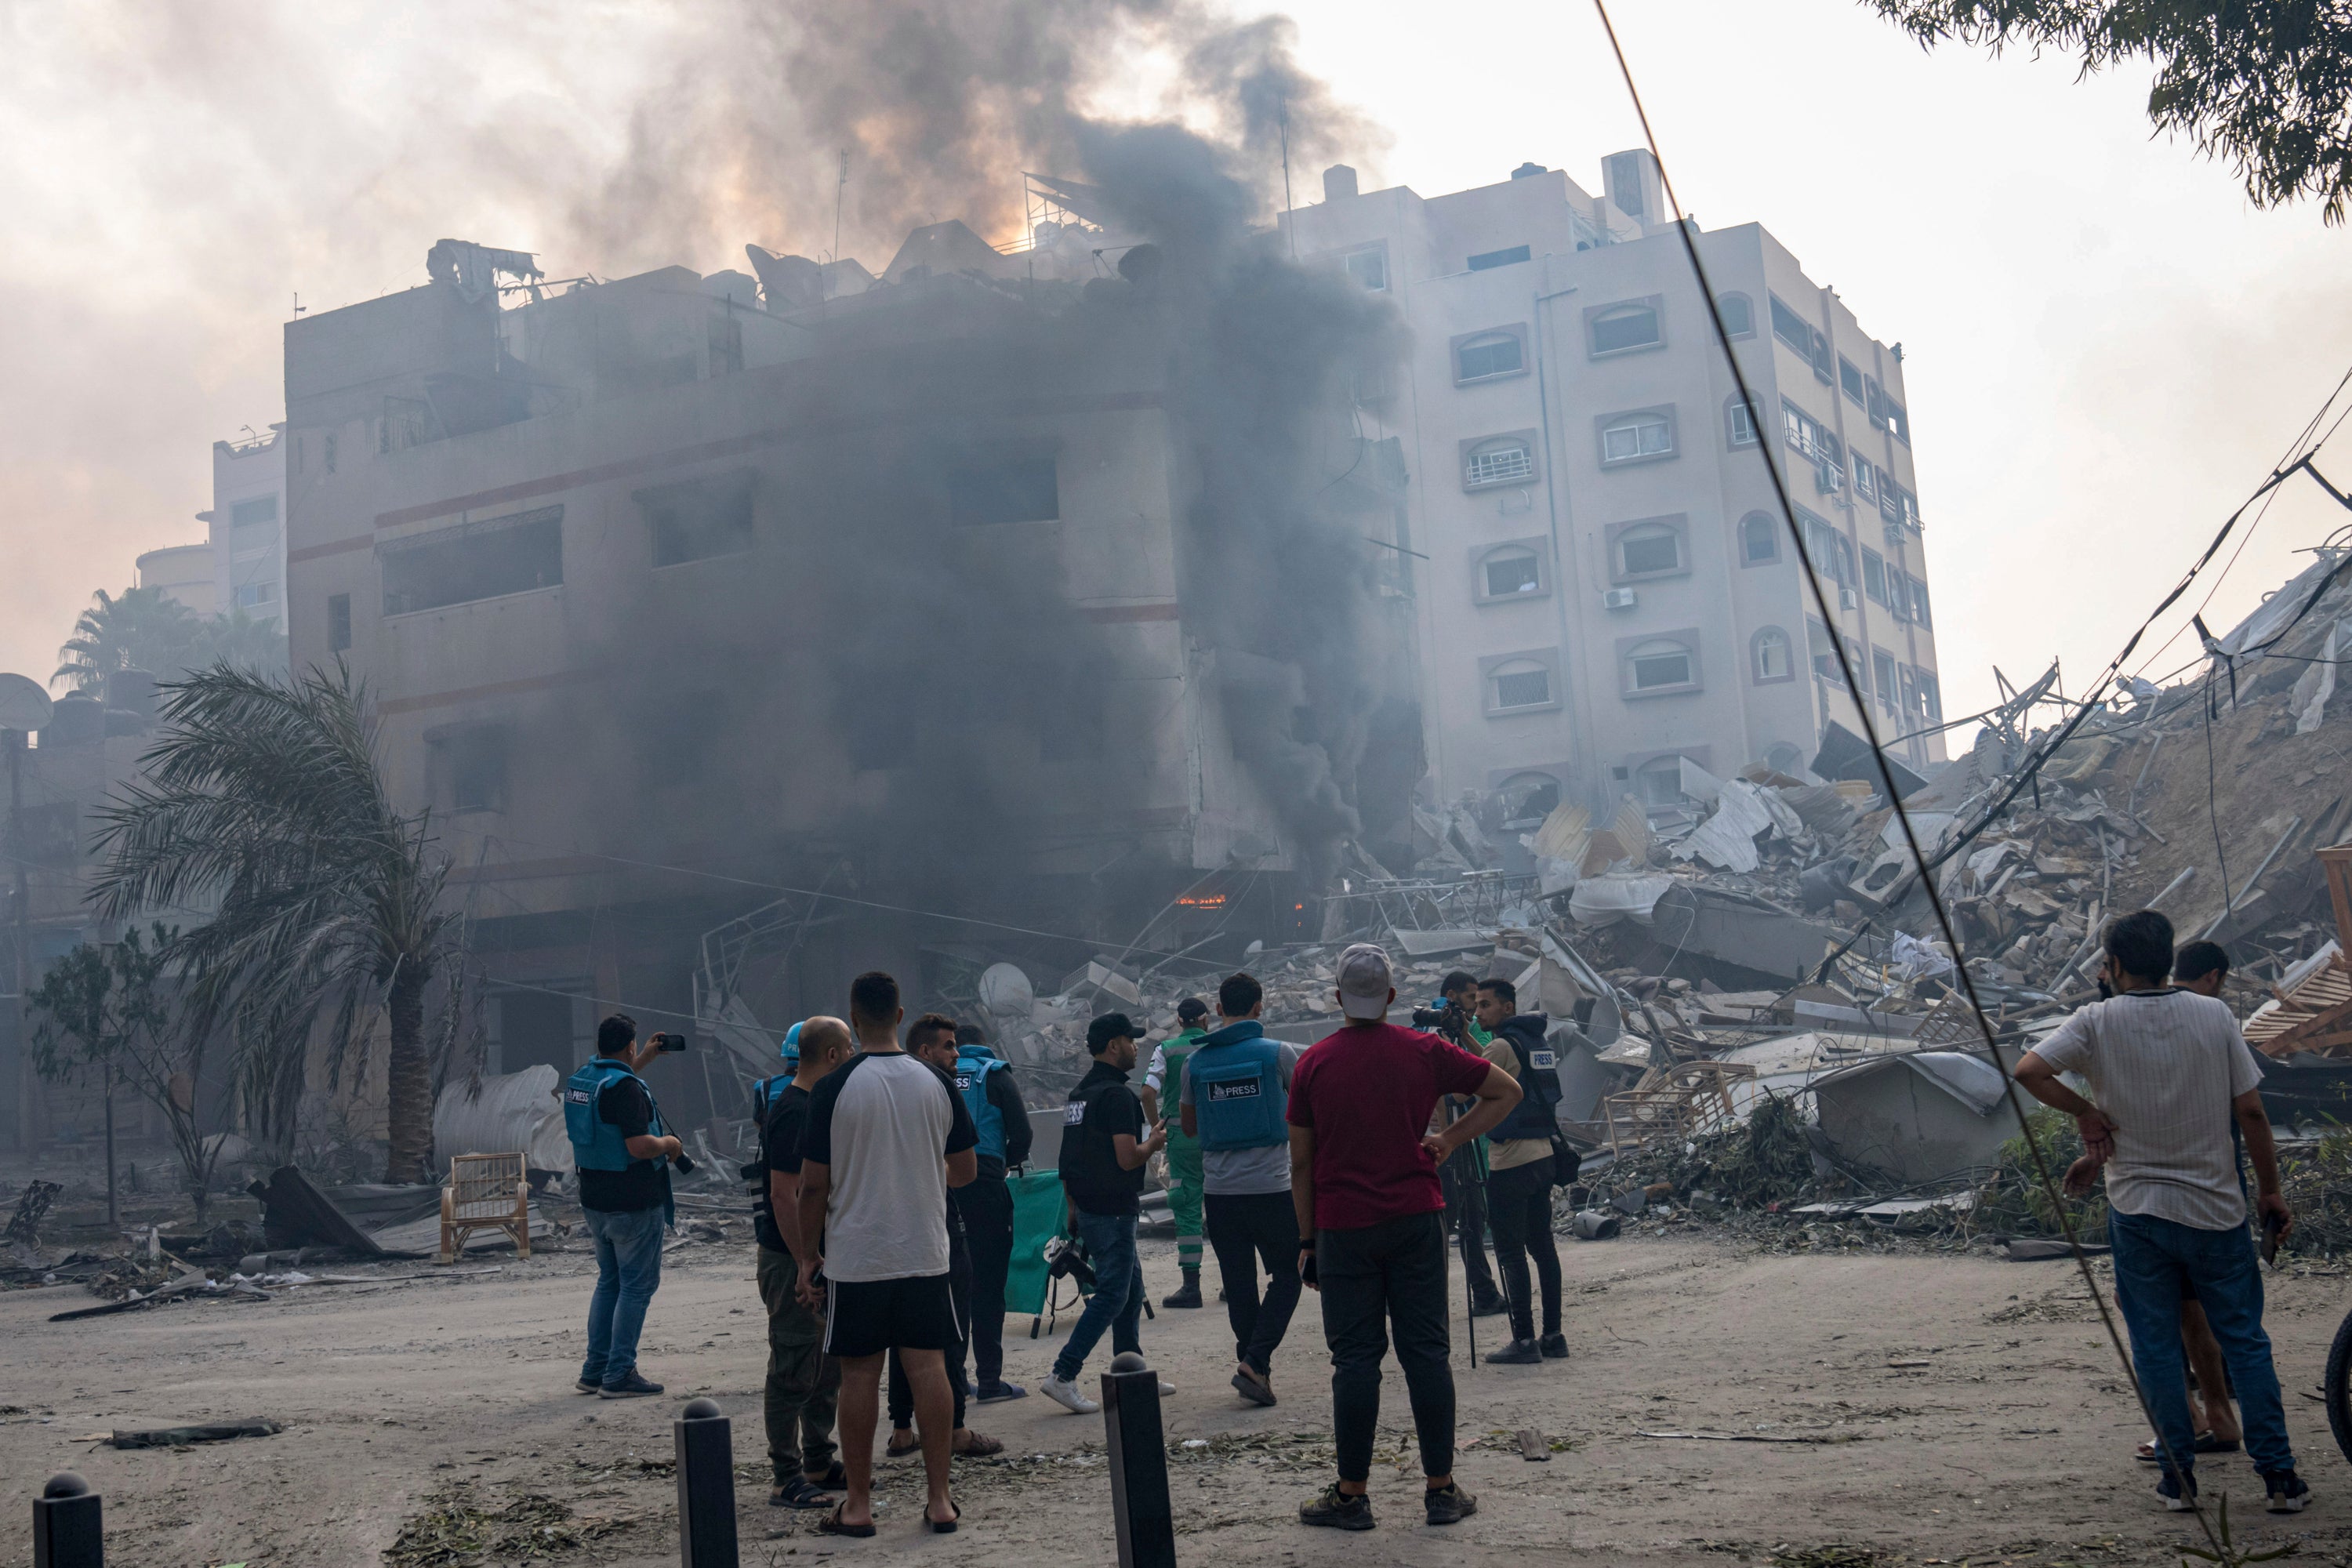 Palestinians inspect the rubble of a building in Gaza City after it was hit by an Israeli airstrike